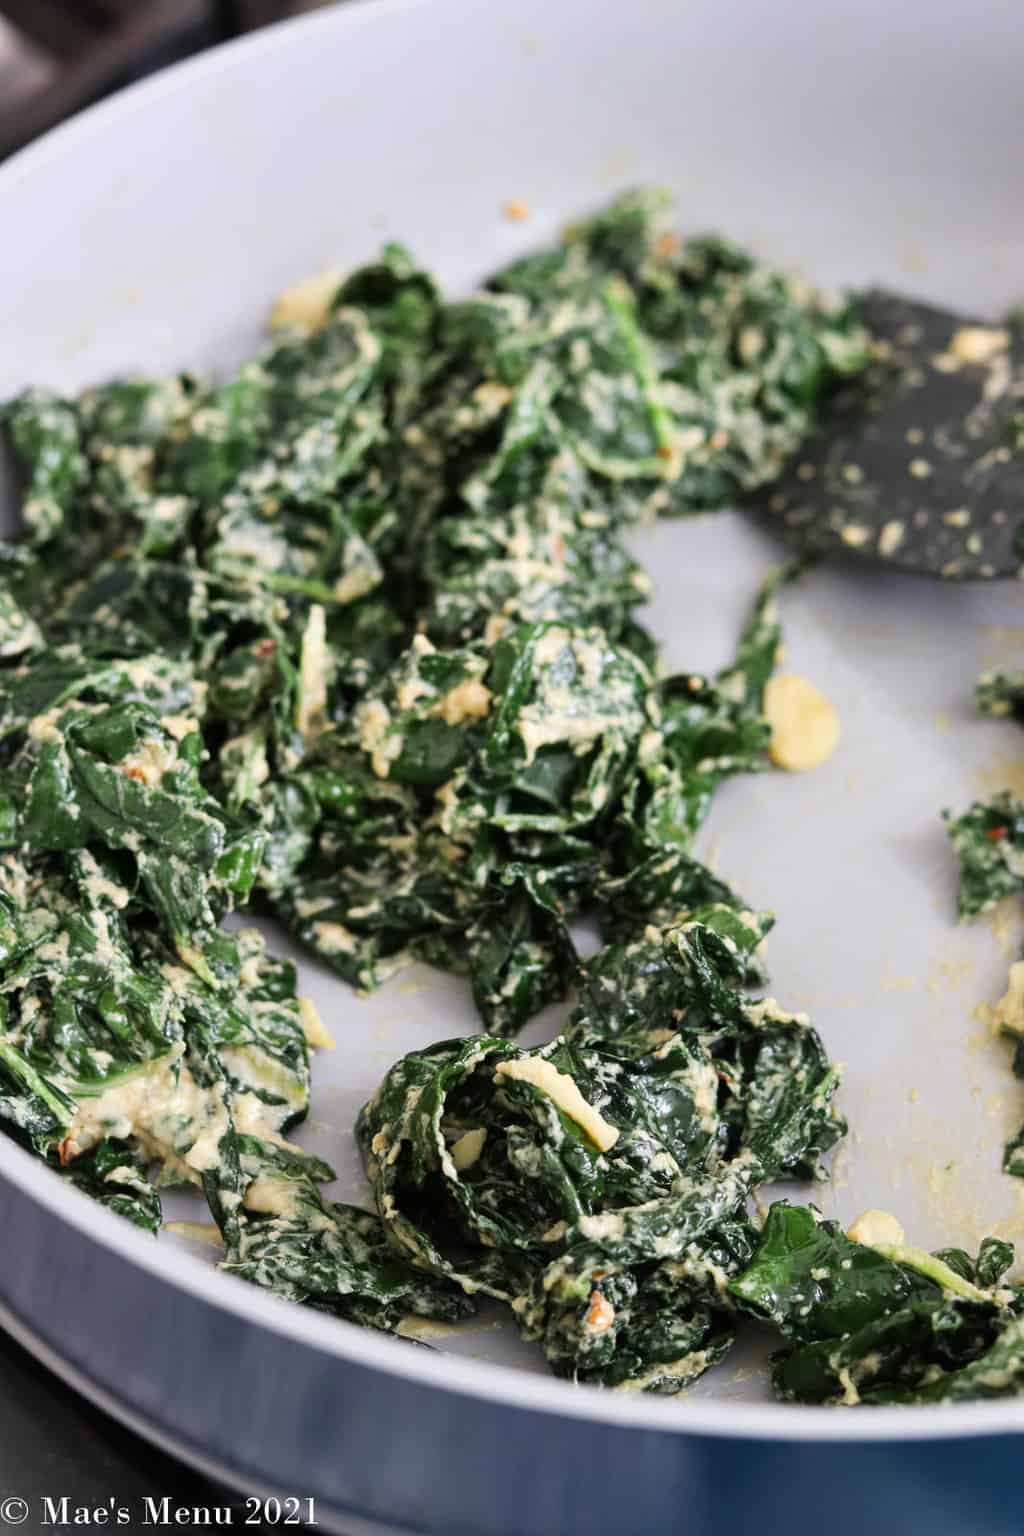 the warm kale salad tossed with the tahini salad dressing